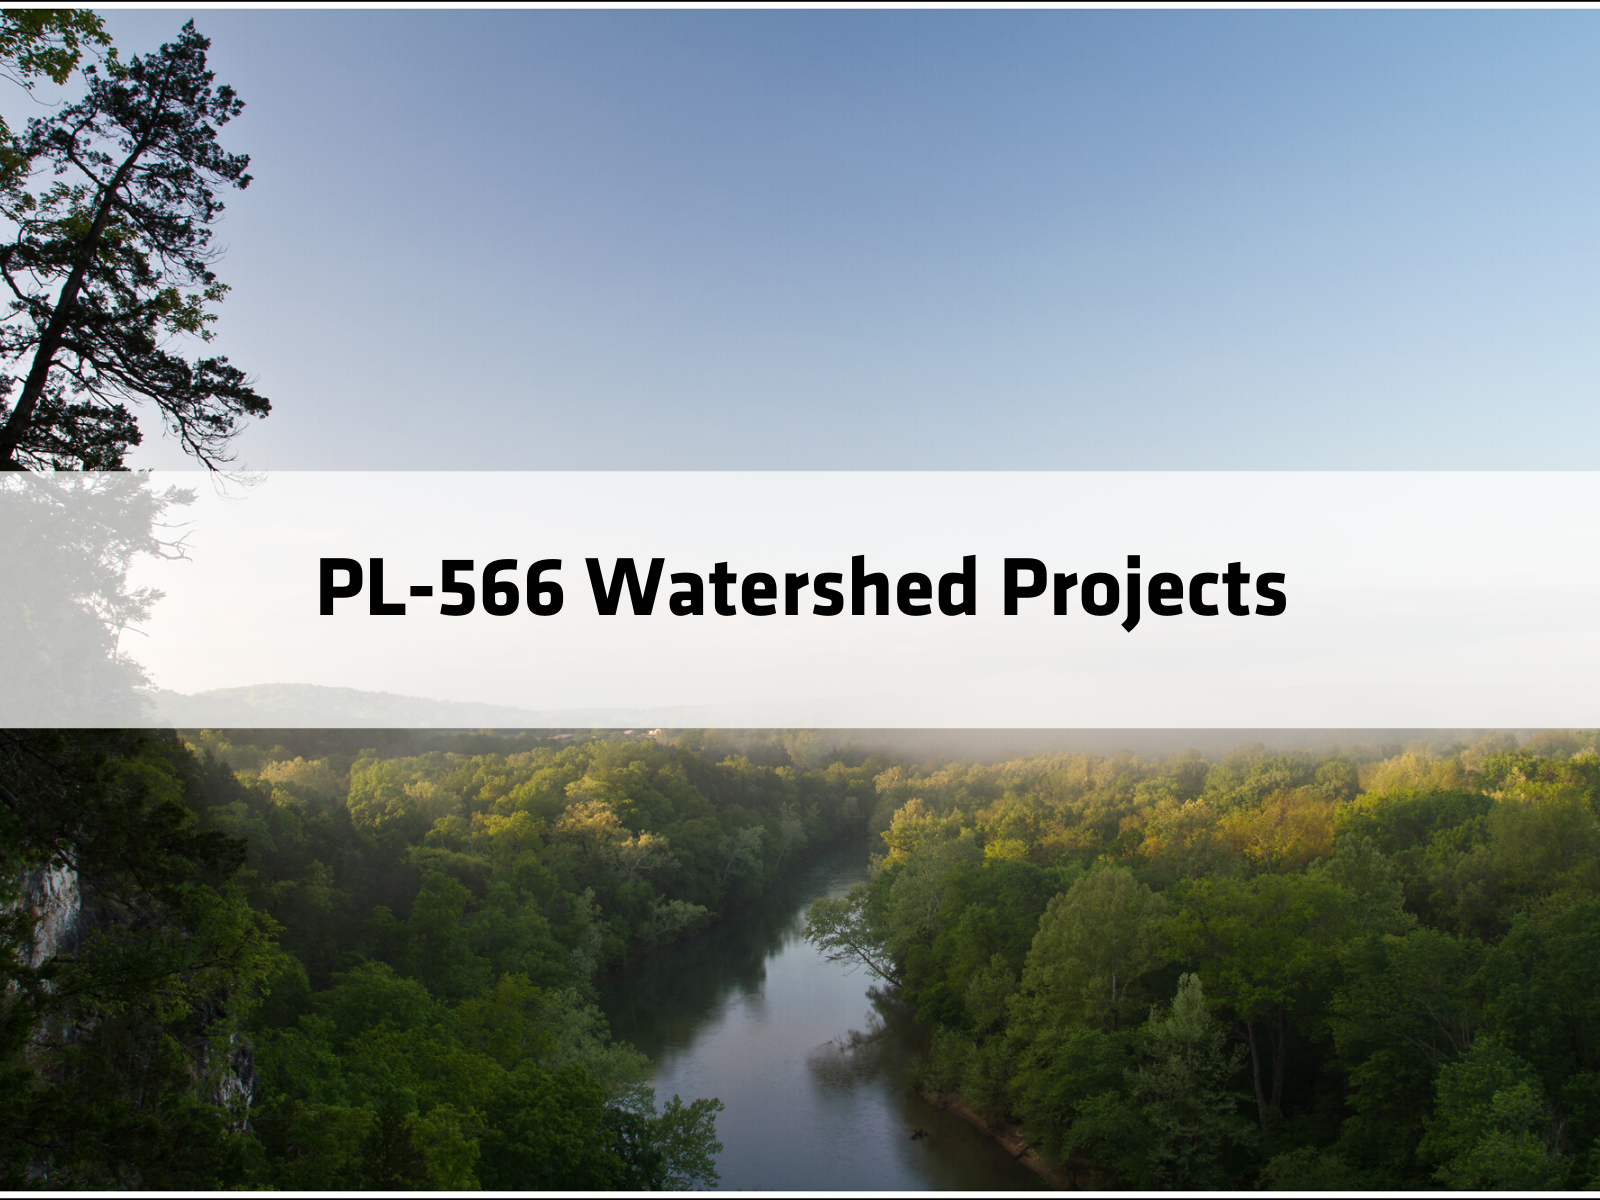 PL-566 Watershed Projects